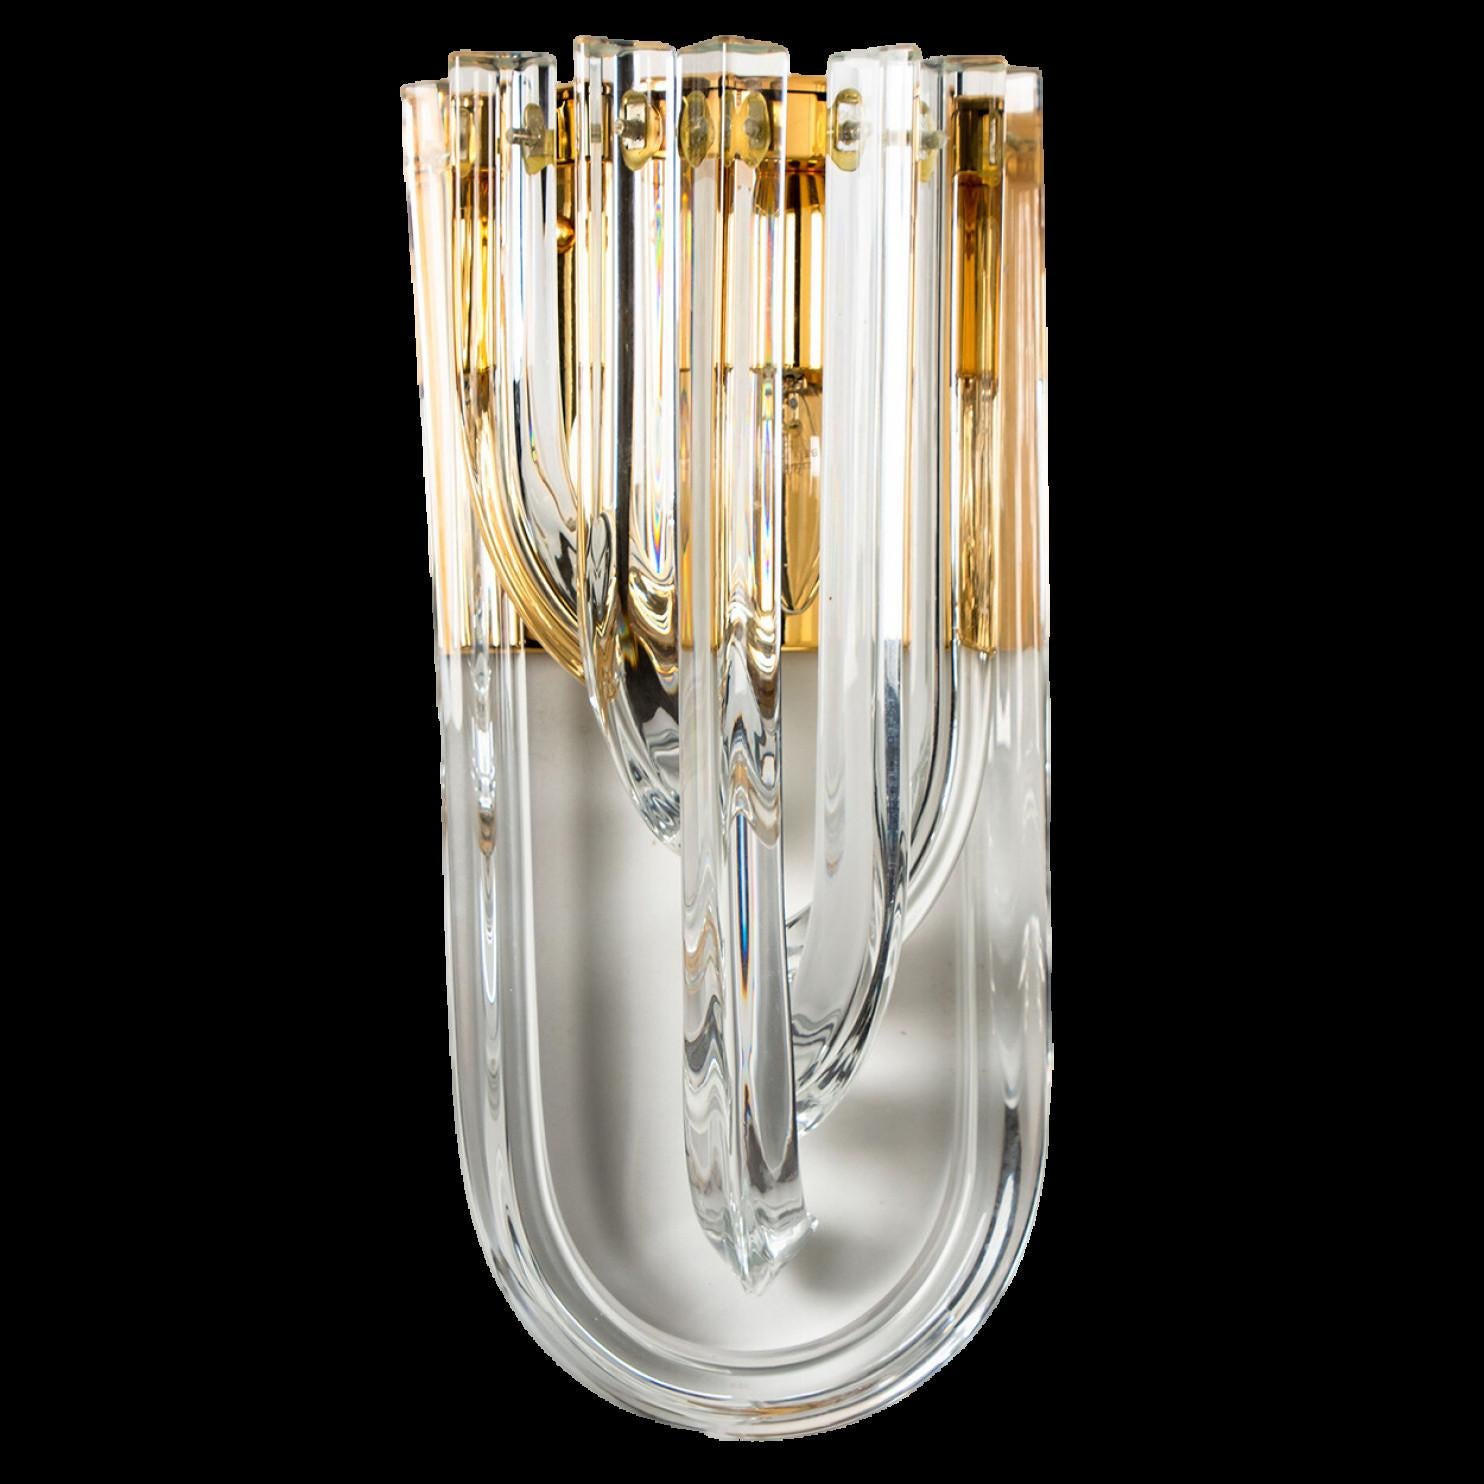 A beautiful and impressive Venini wall light, curved crystal glass and gilt brass, Italy.

The chandelier is made of curved crystal Murano glasses in different lengths. The flush mount has eight lights with 18 Murano crystal tubes and a gold-plated